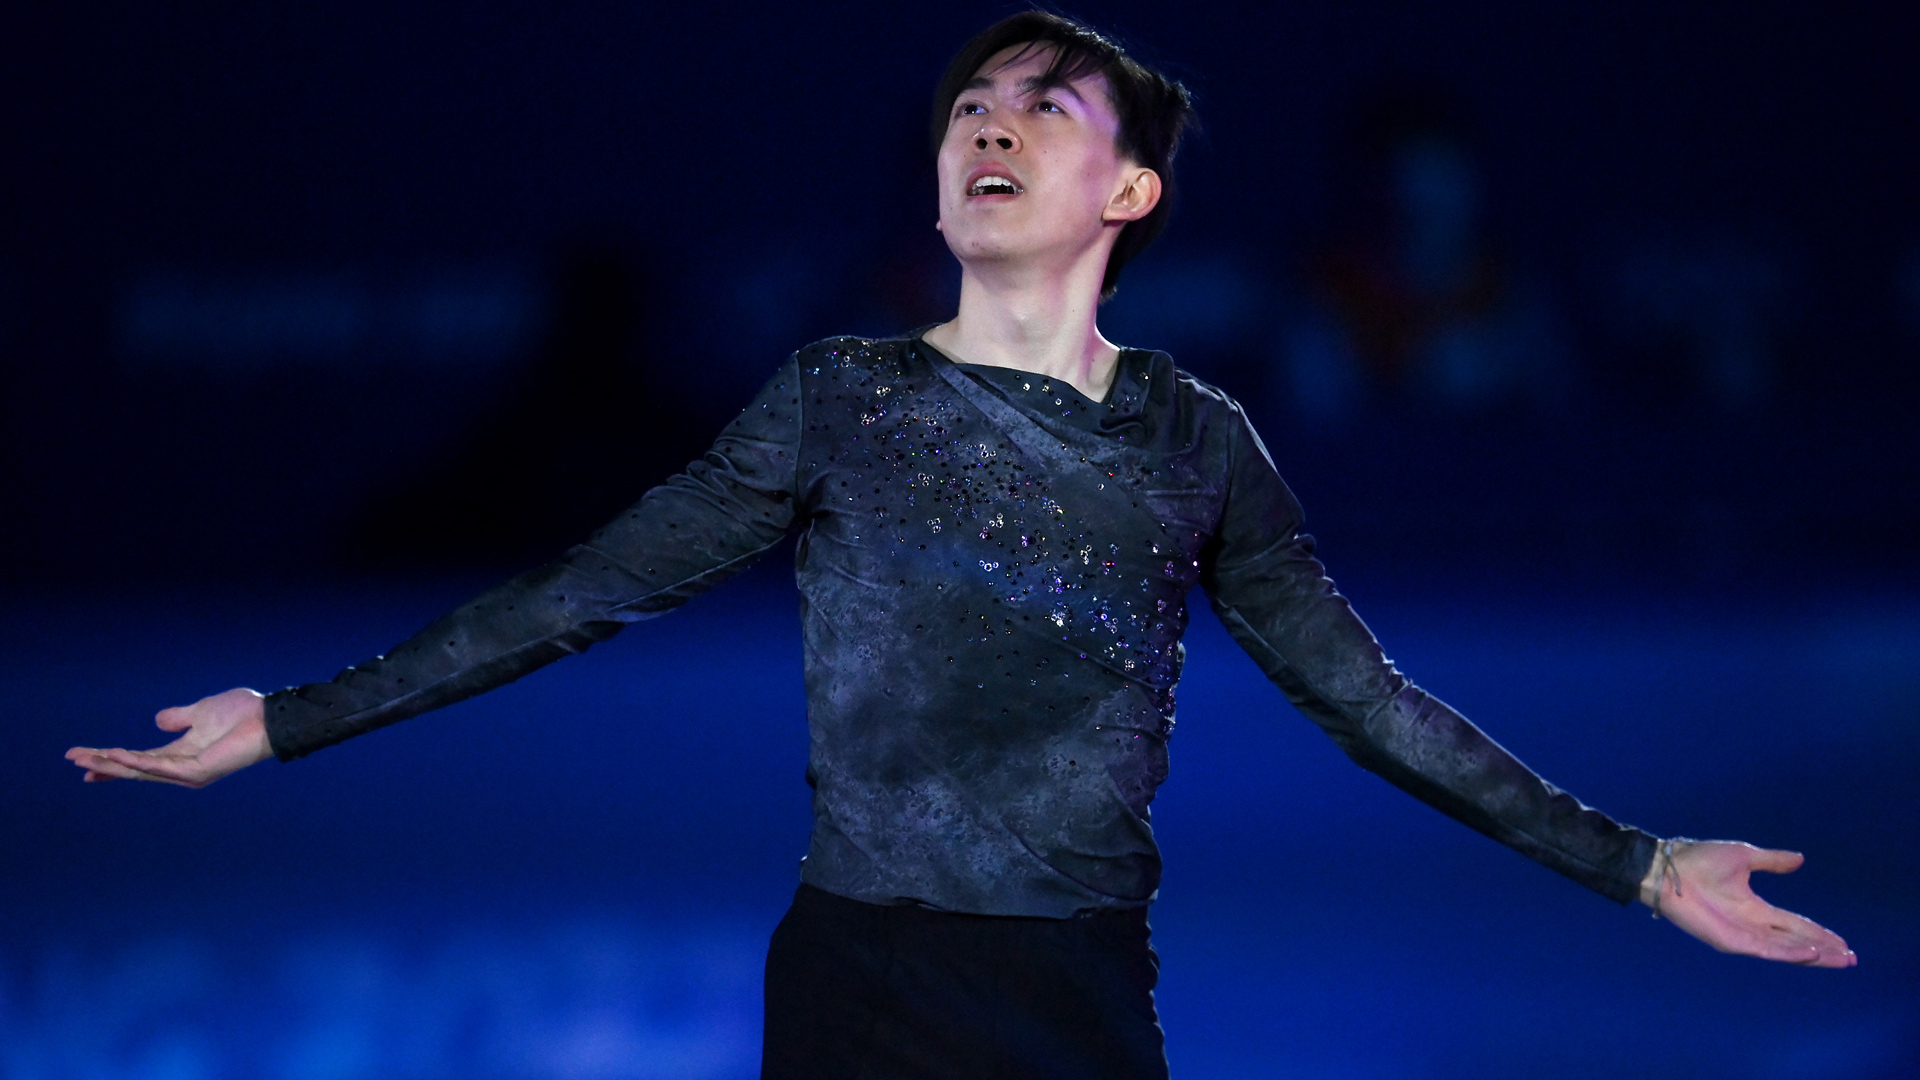 Uno Wins Figure Skating Worlds as American Zhou Takes Bronze